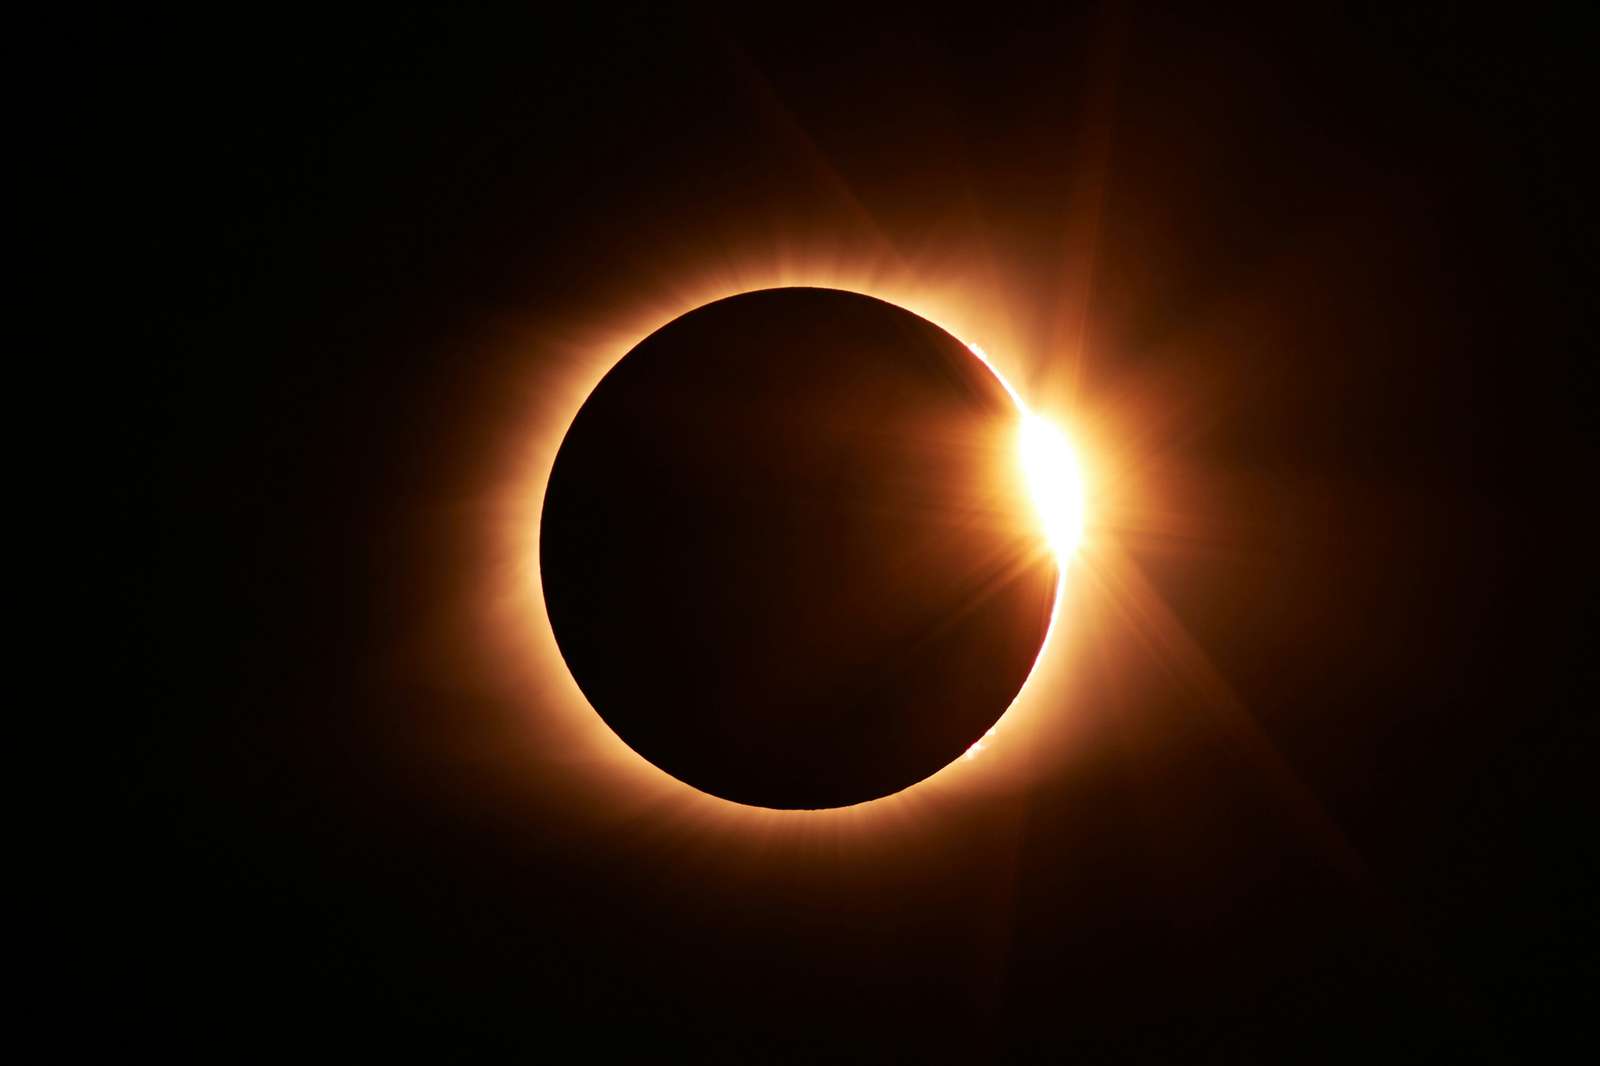 Eclipse in sky puzzle online from photo